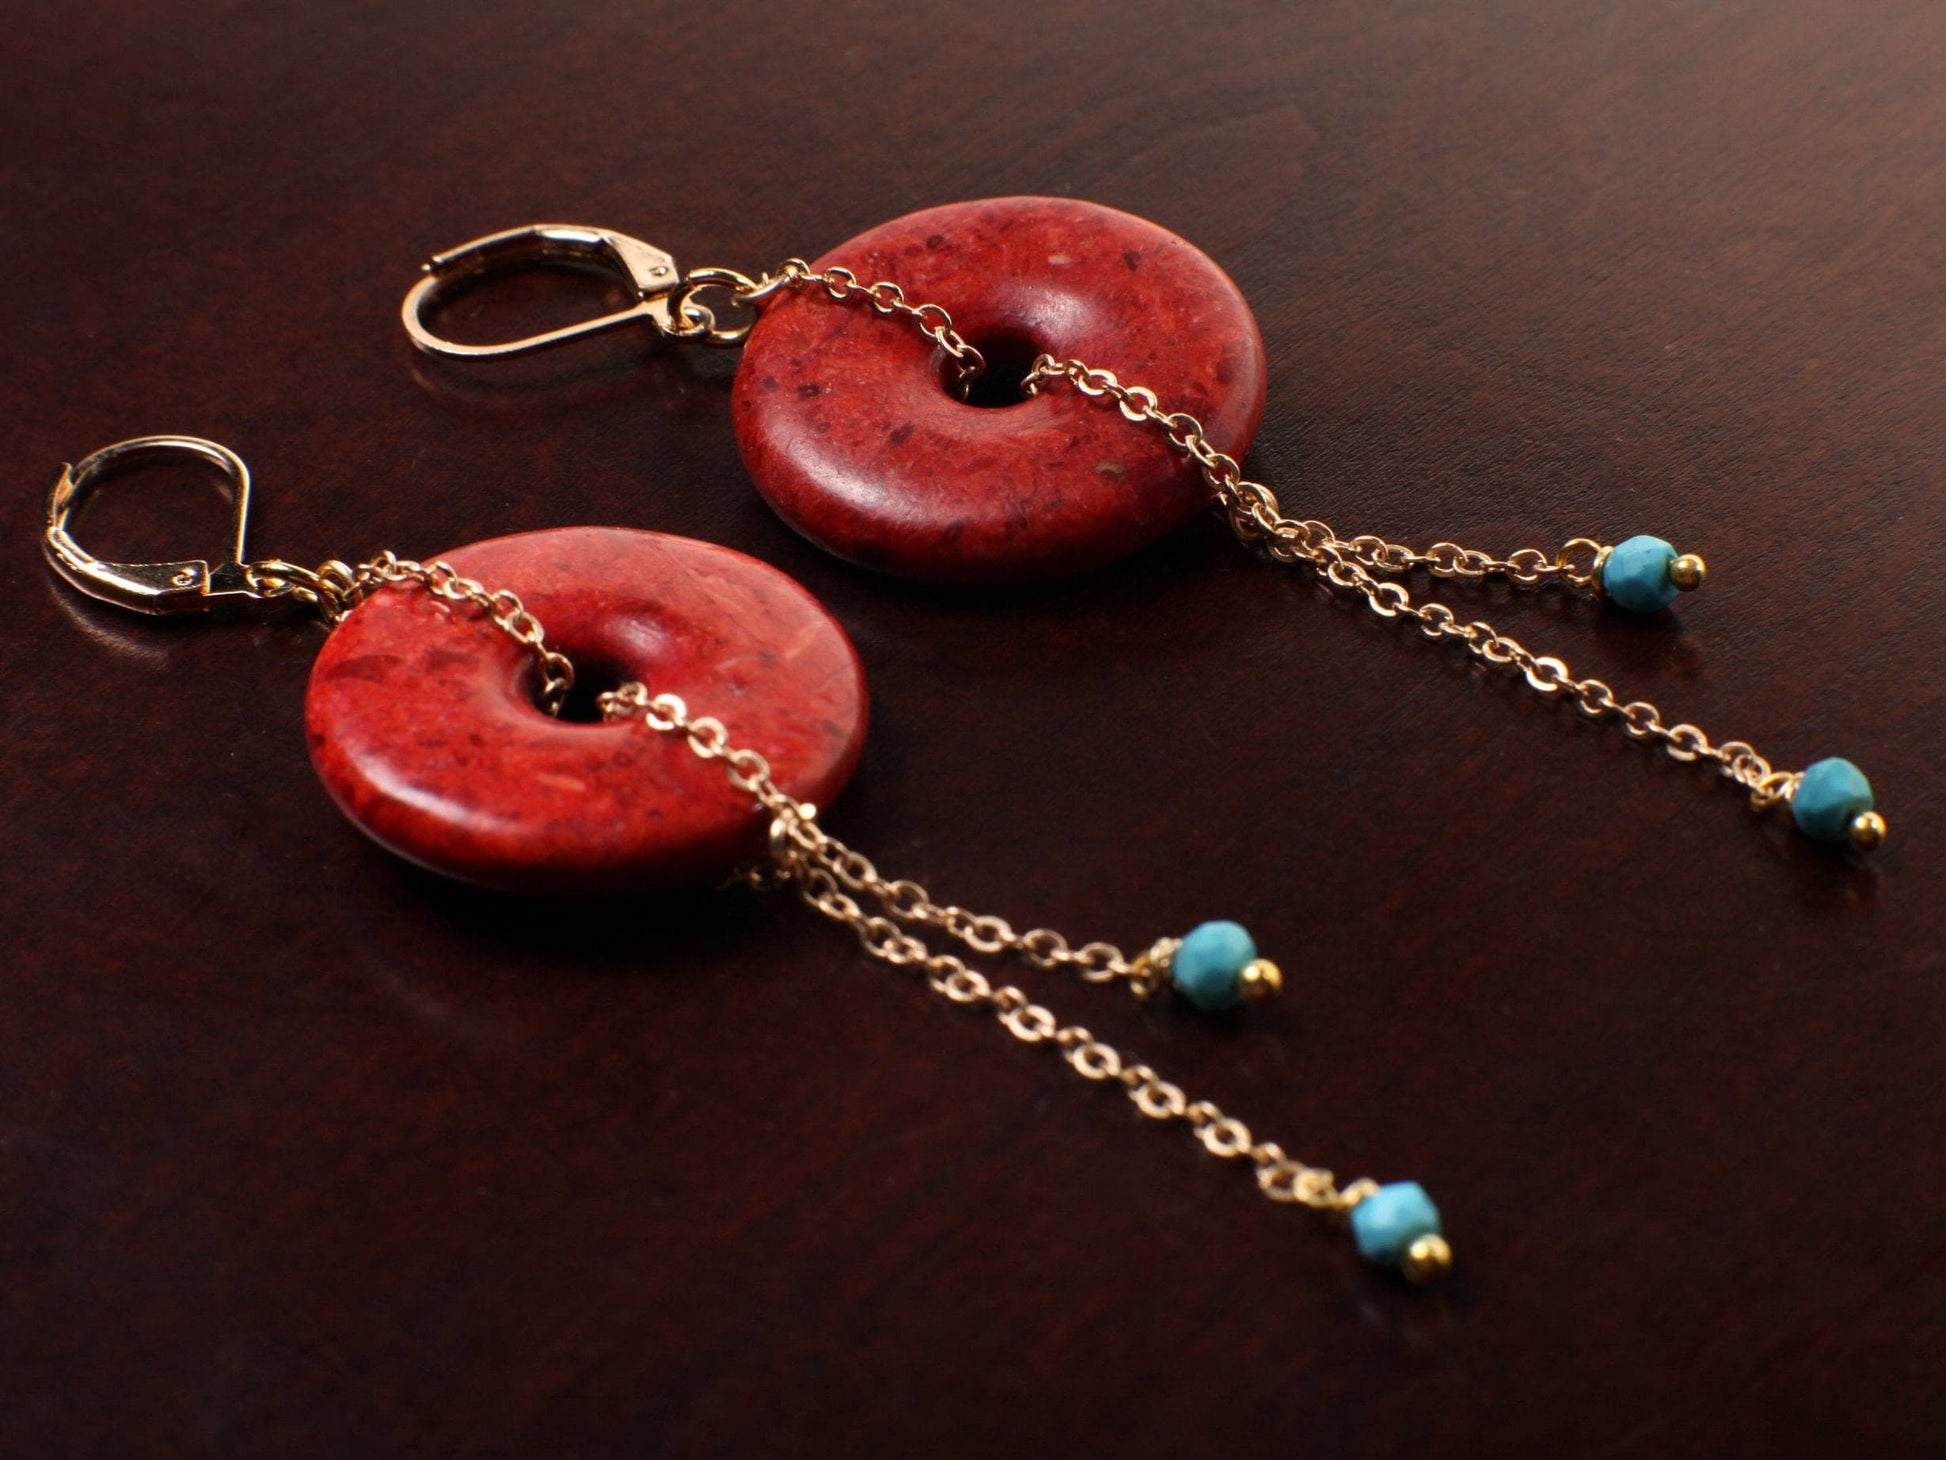 Sponge Coral 25mm Donut Dangle and genuine Faceted Turquoise Beads in Gold Plated Brass or 14K Gold Filled Chain and Leverback Earrings